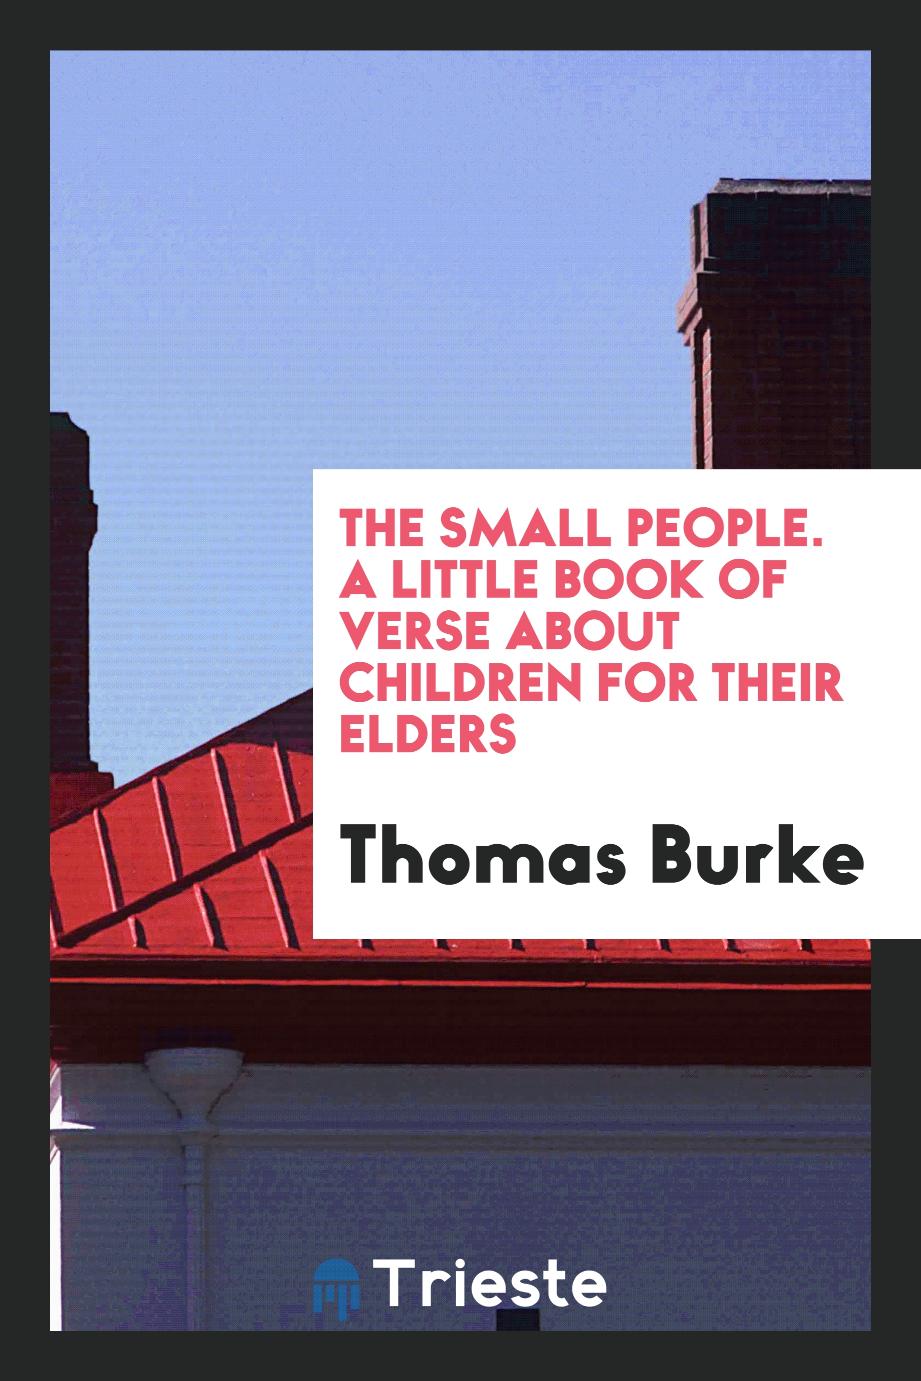 The small people. A little book of verse about children for their elders